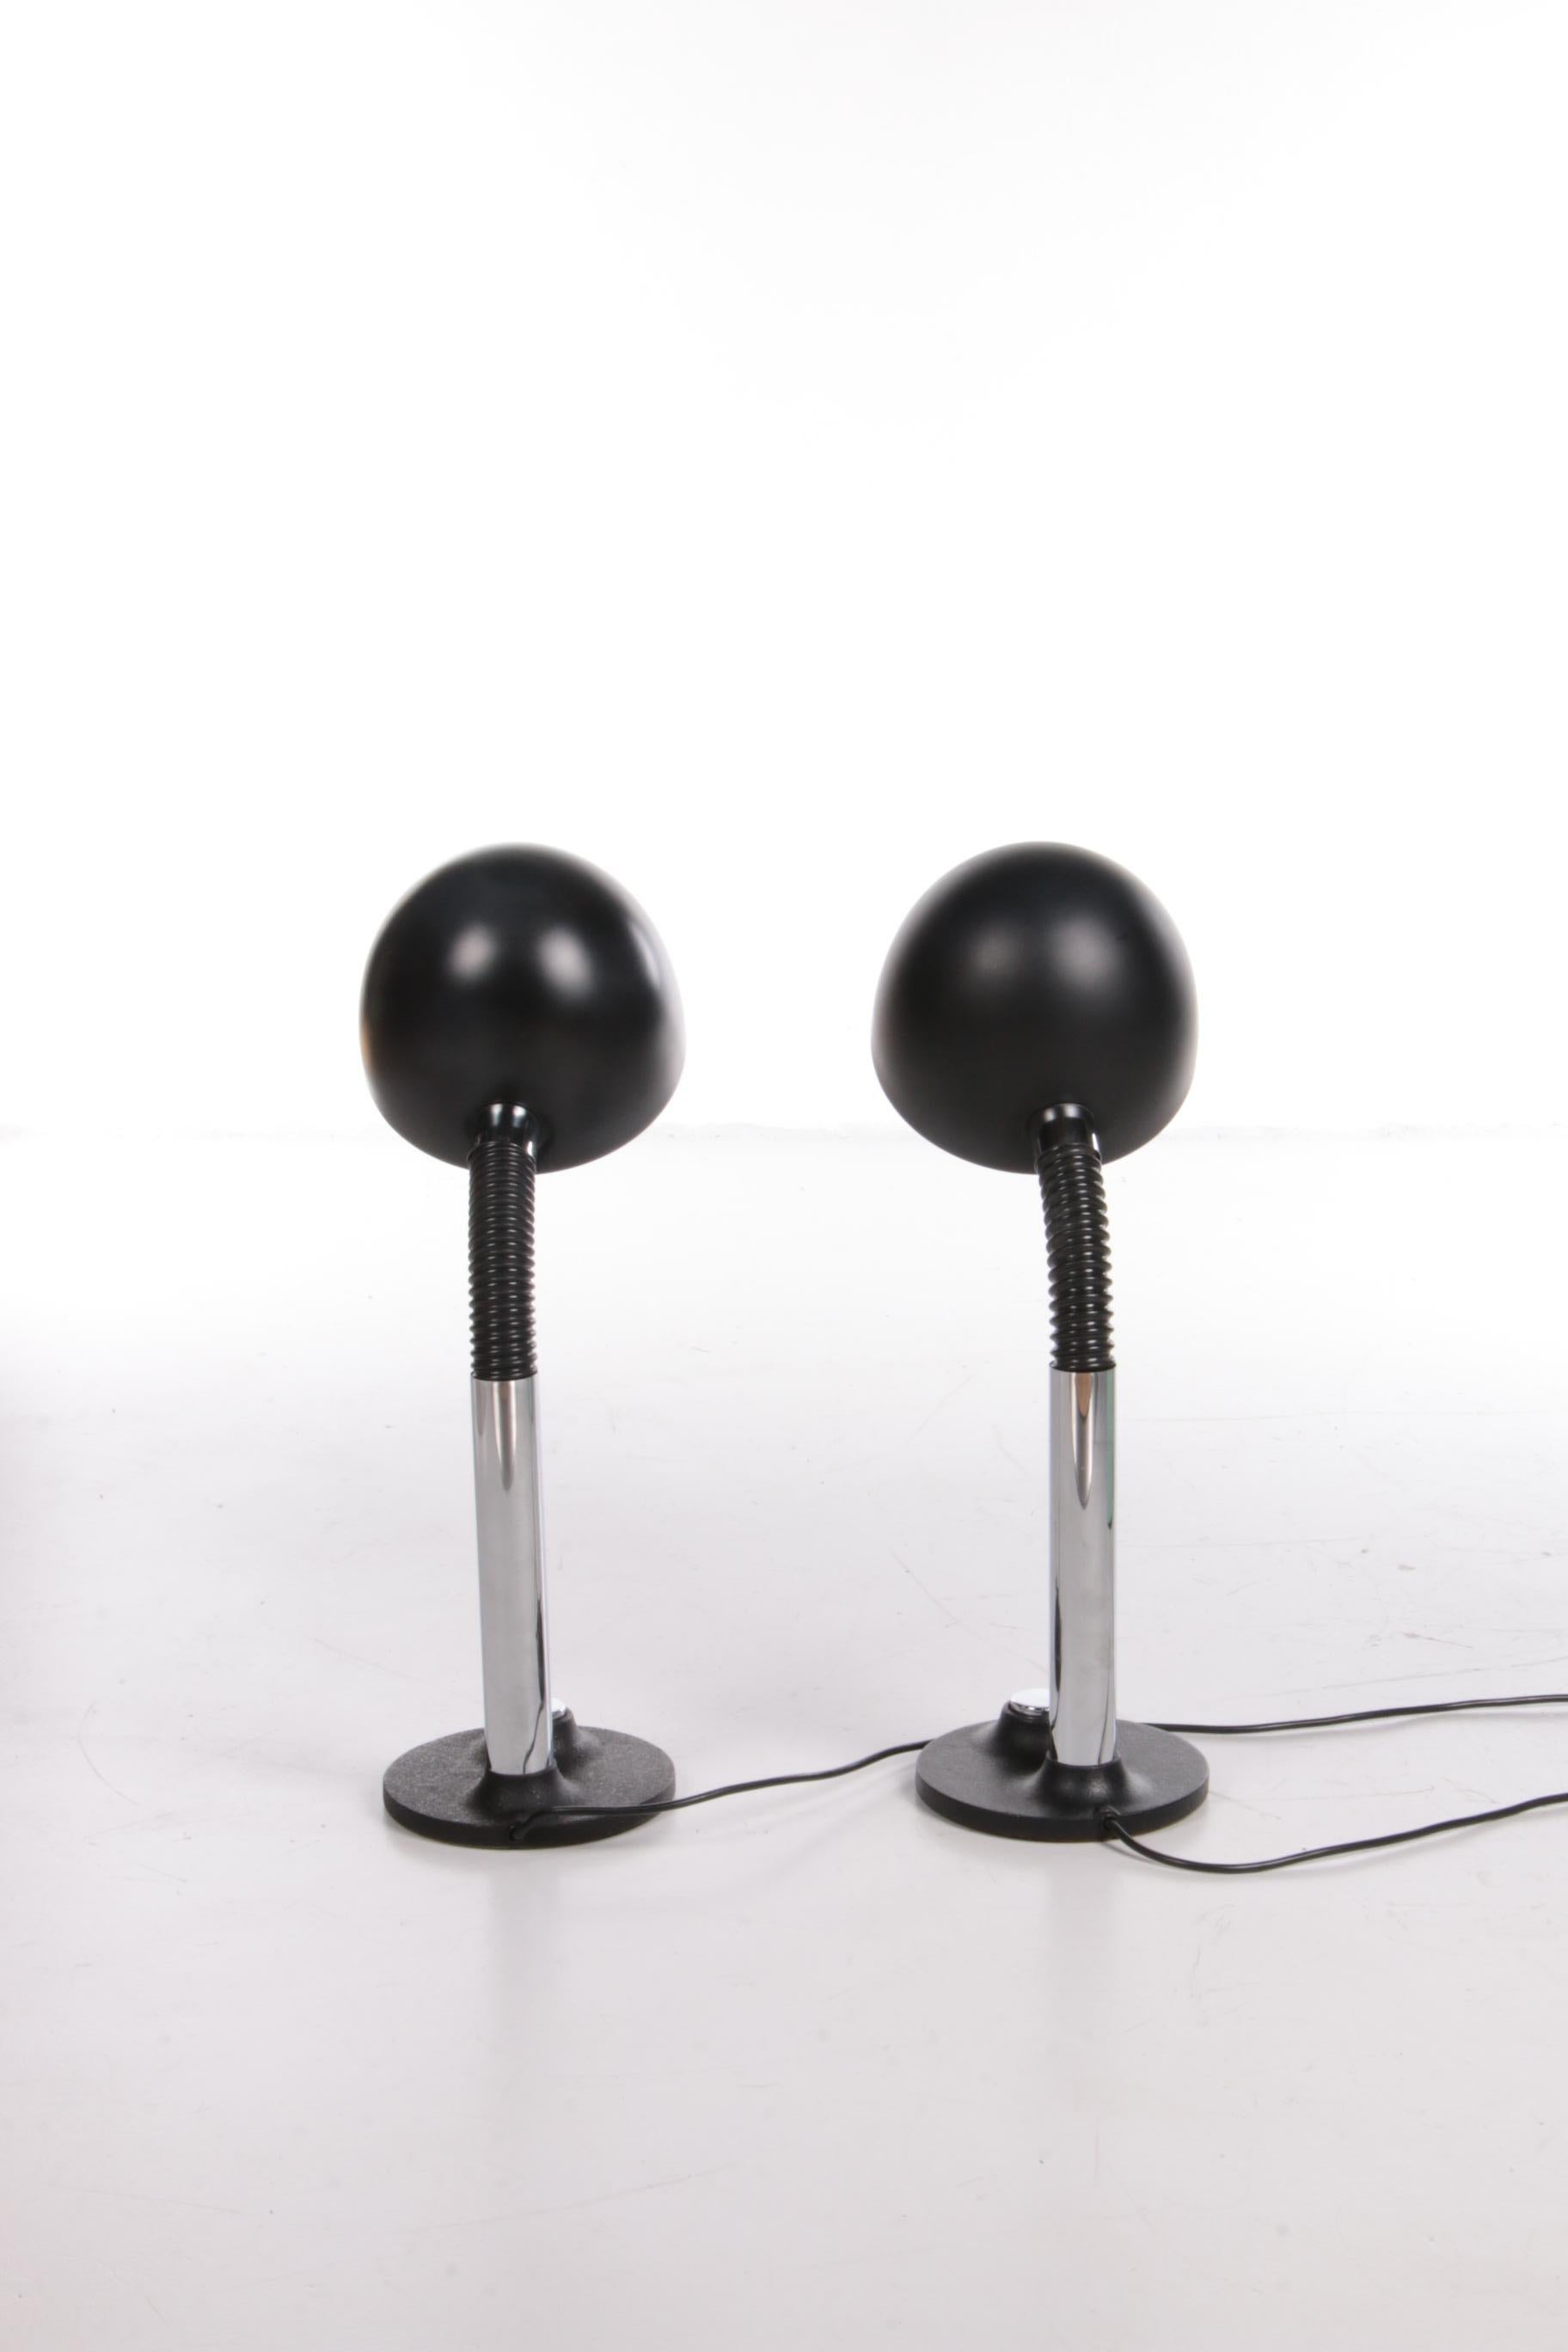 Late 20th Century Vintage Set of 2 Desk Lamps by Egon Hillebrand, 1970s Germany For Sale